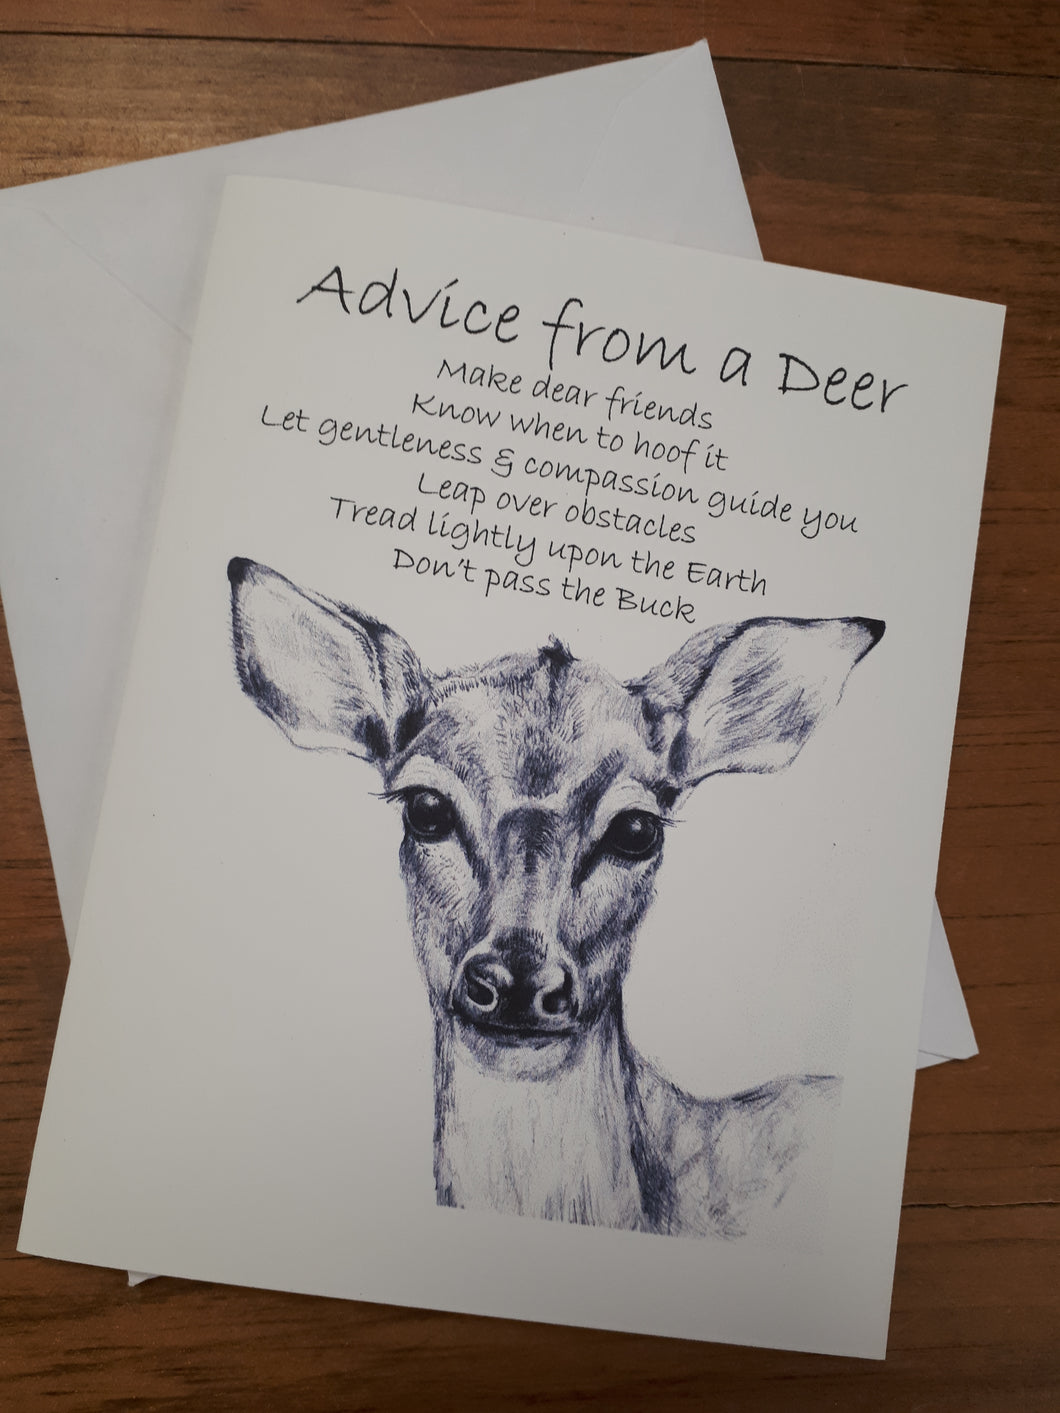 Advice from a Deer